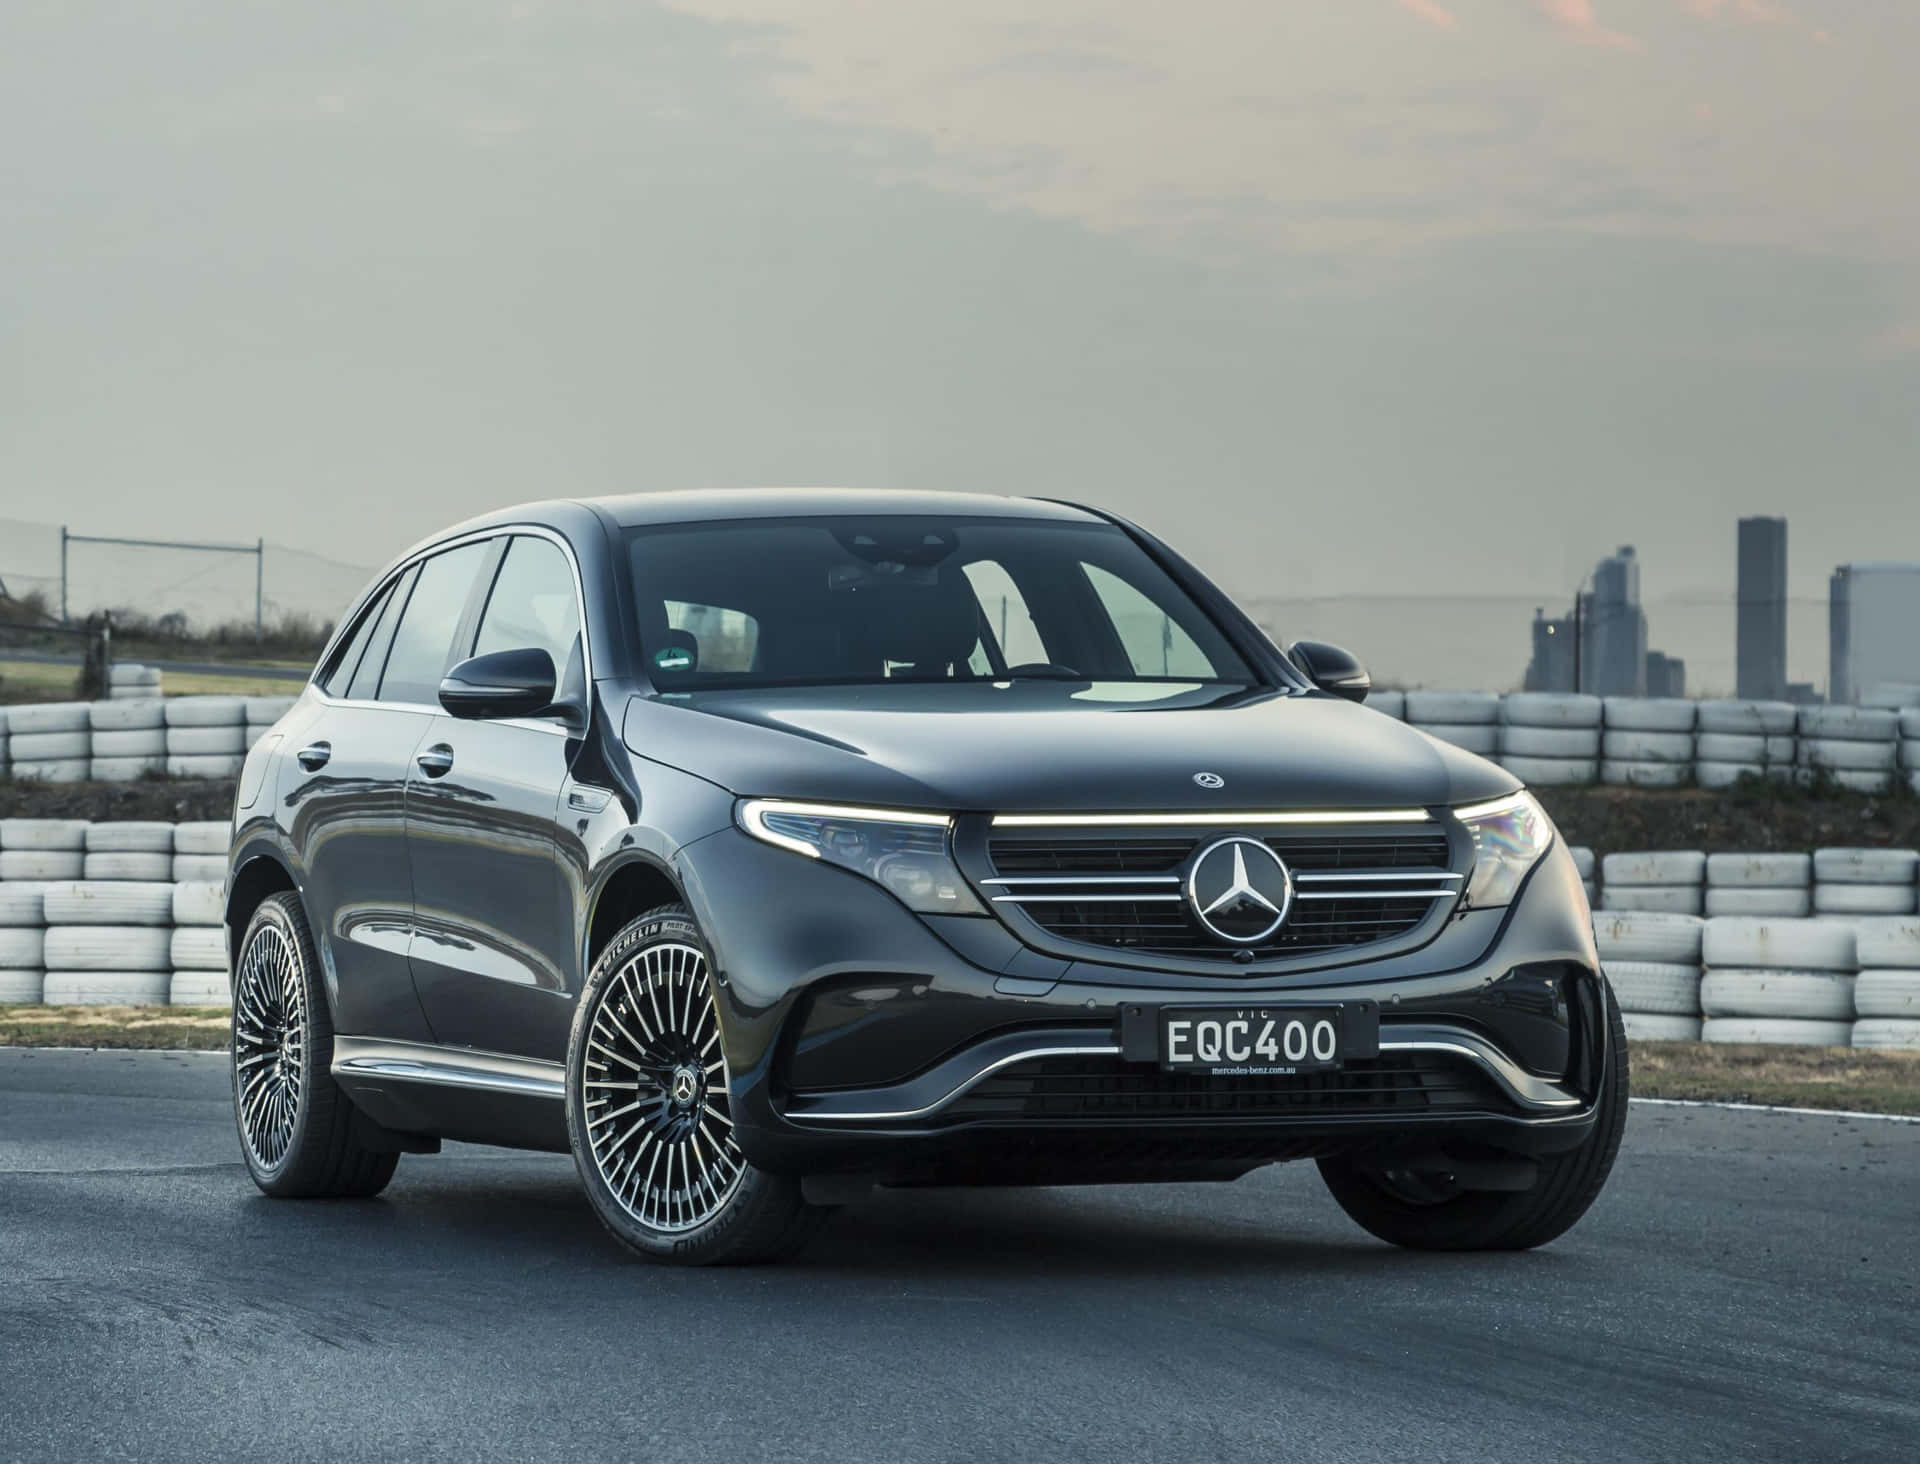 Stunning View Of The Mercedes Benz Eqc Electric Suv Wallpaper